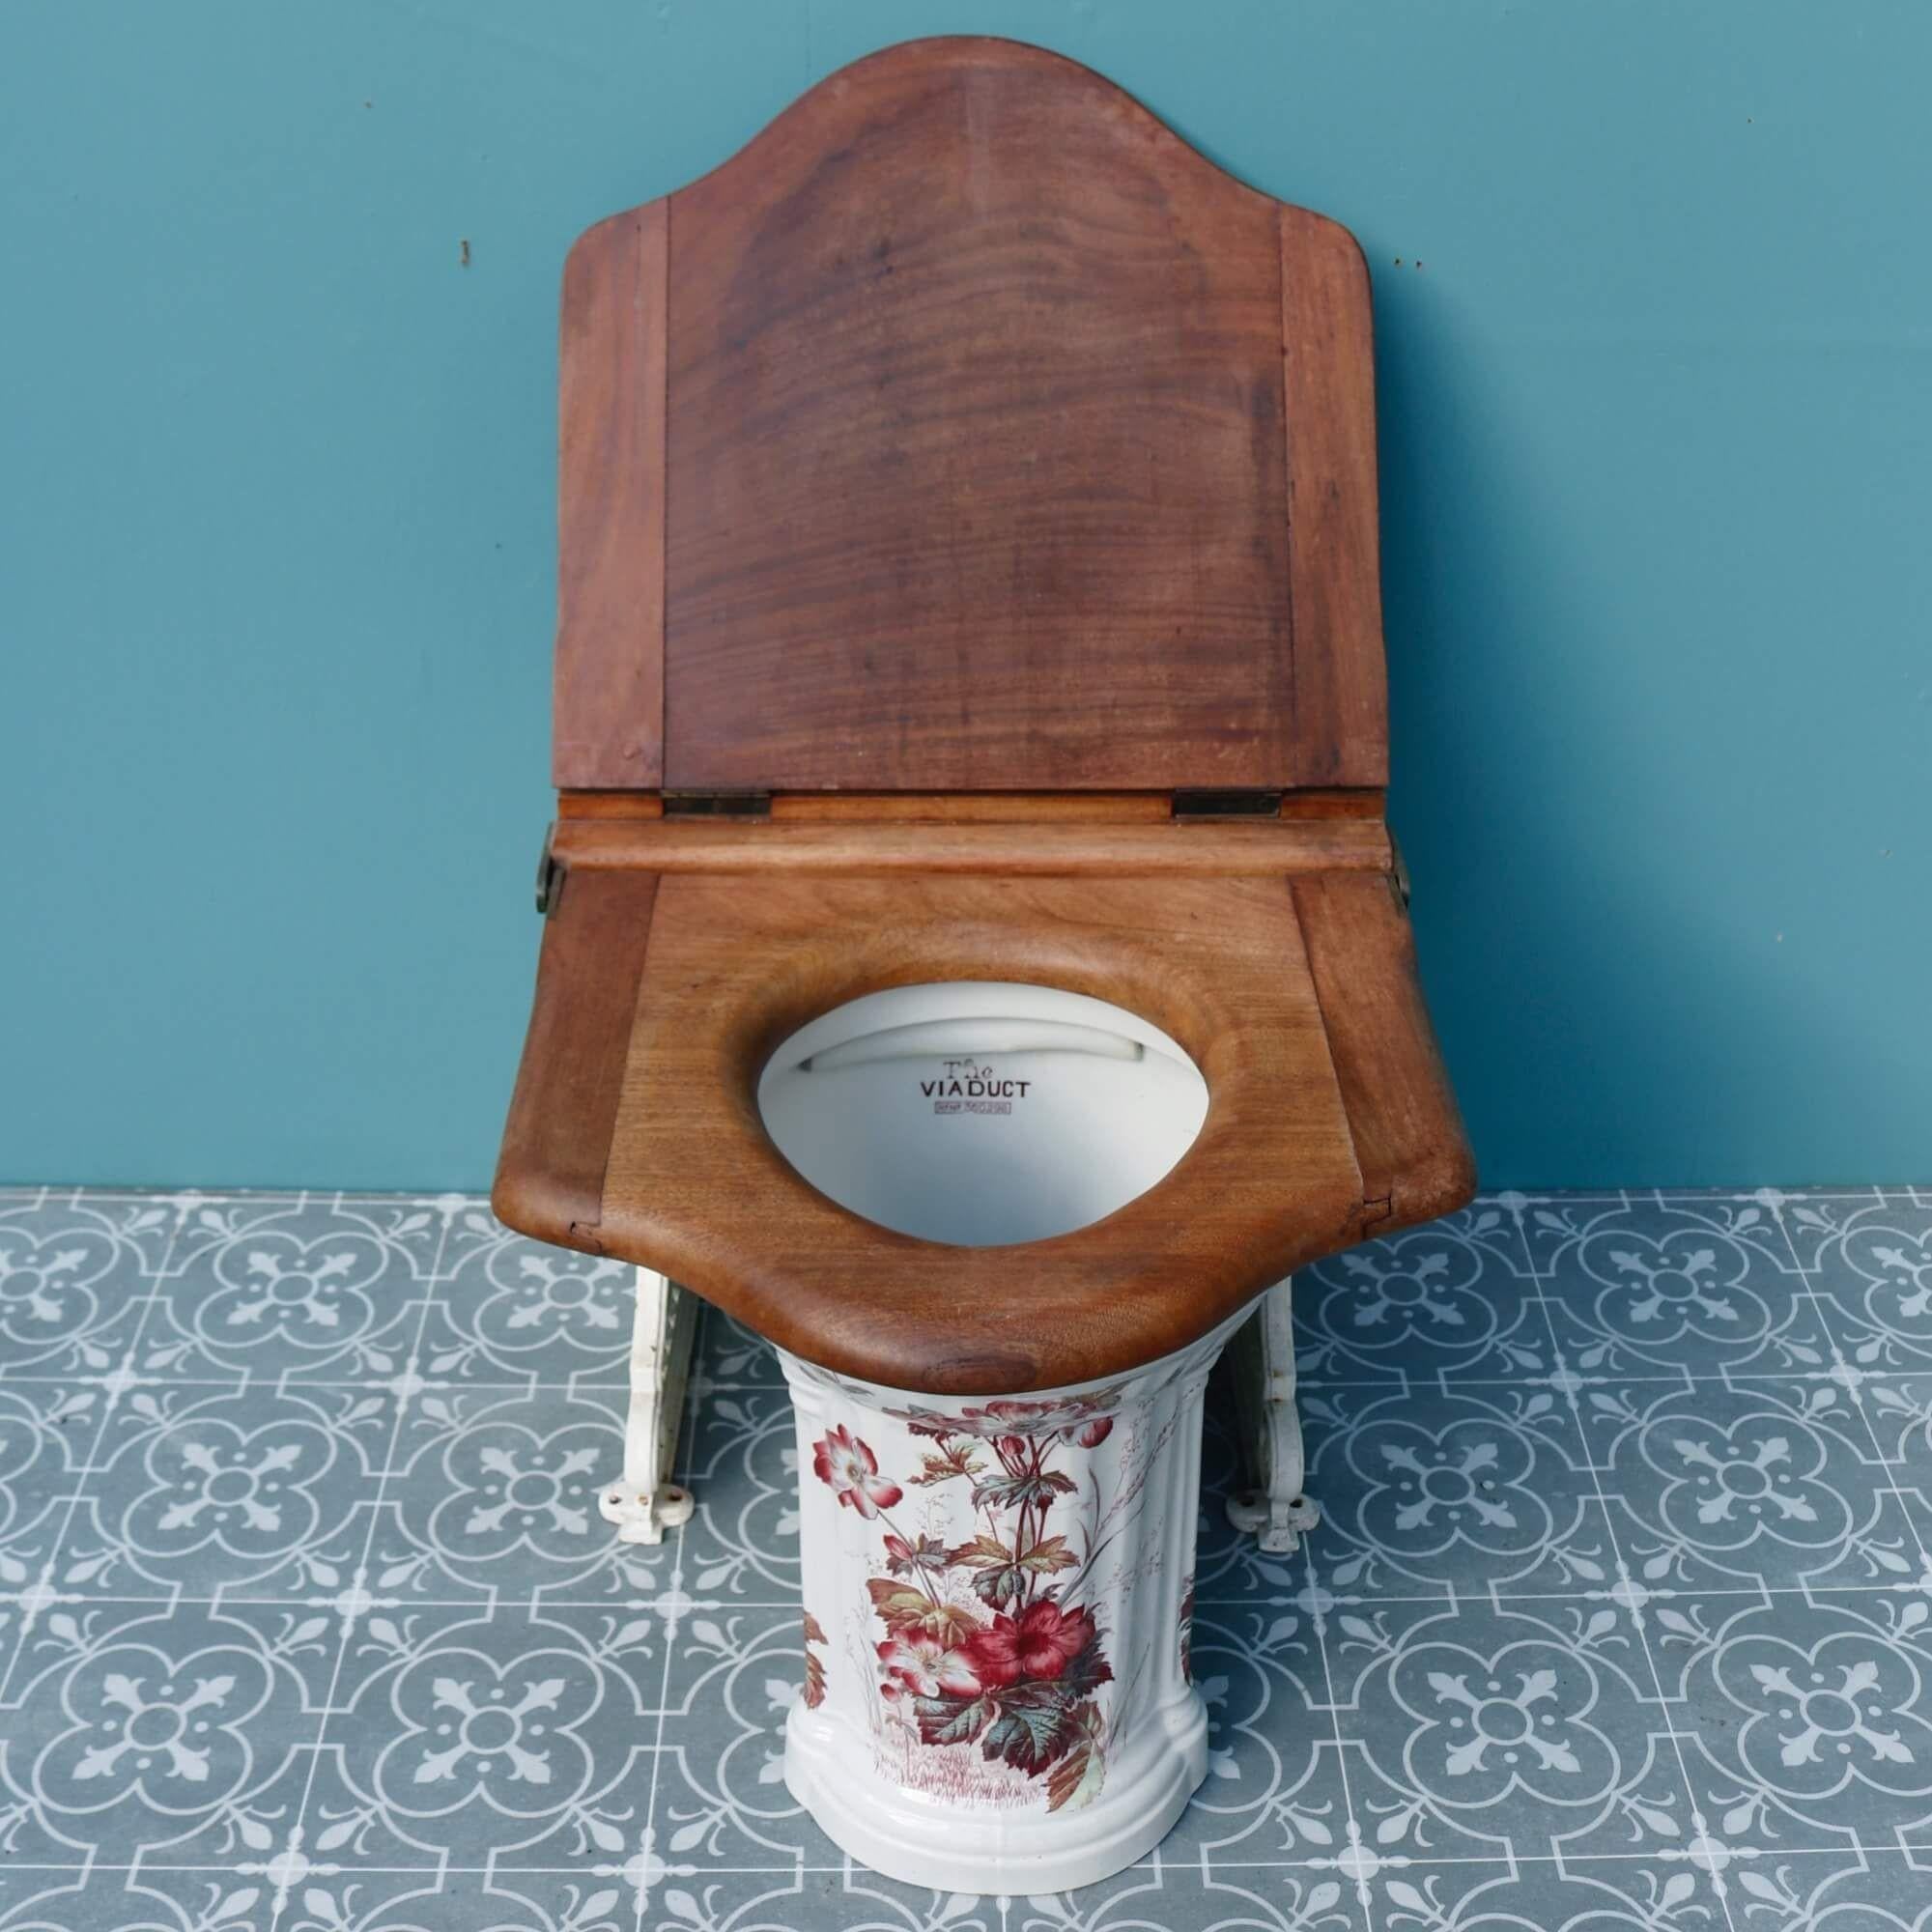 English Antique Victorian Patterned ‘Viaduct’ Toilet with Seat